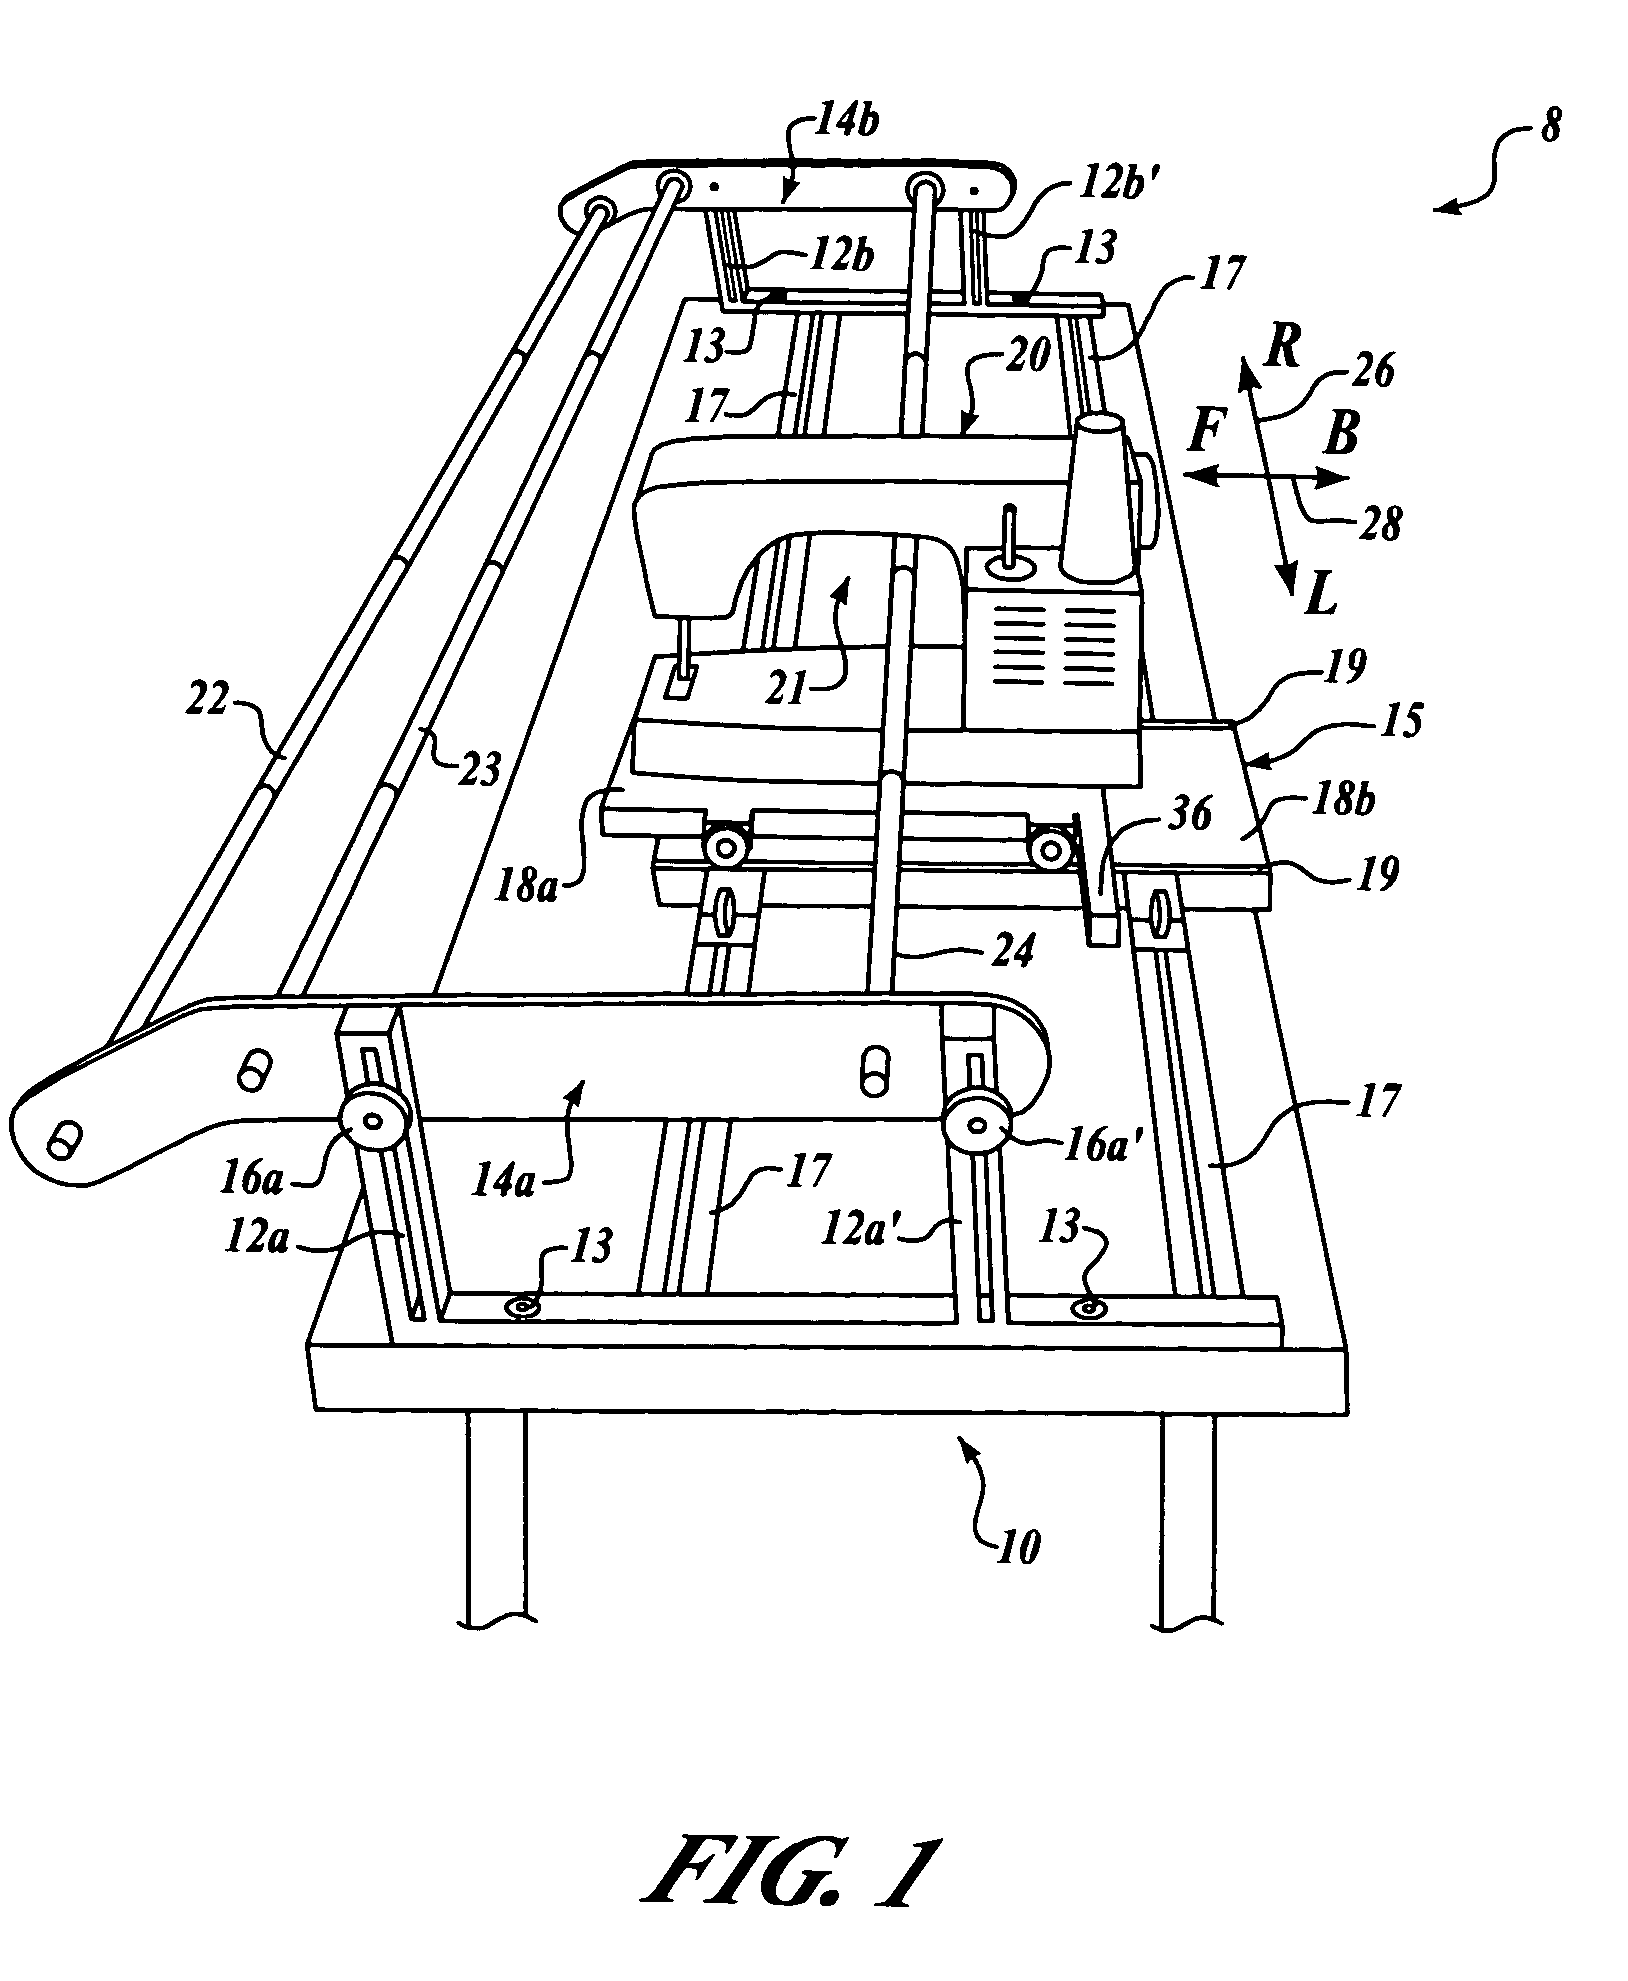 Movable quilting work area system and method